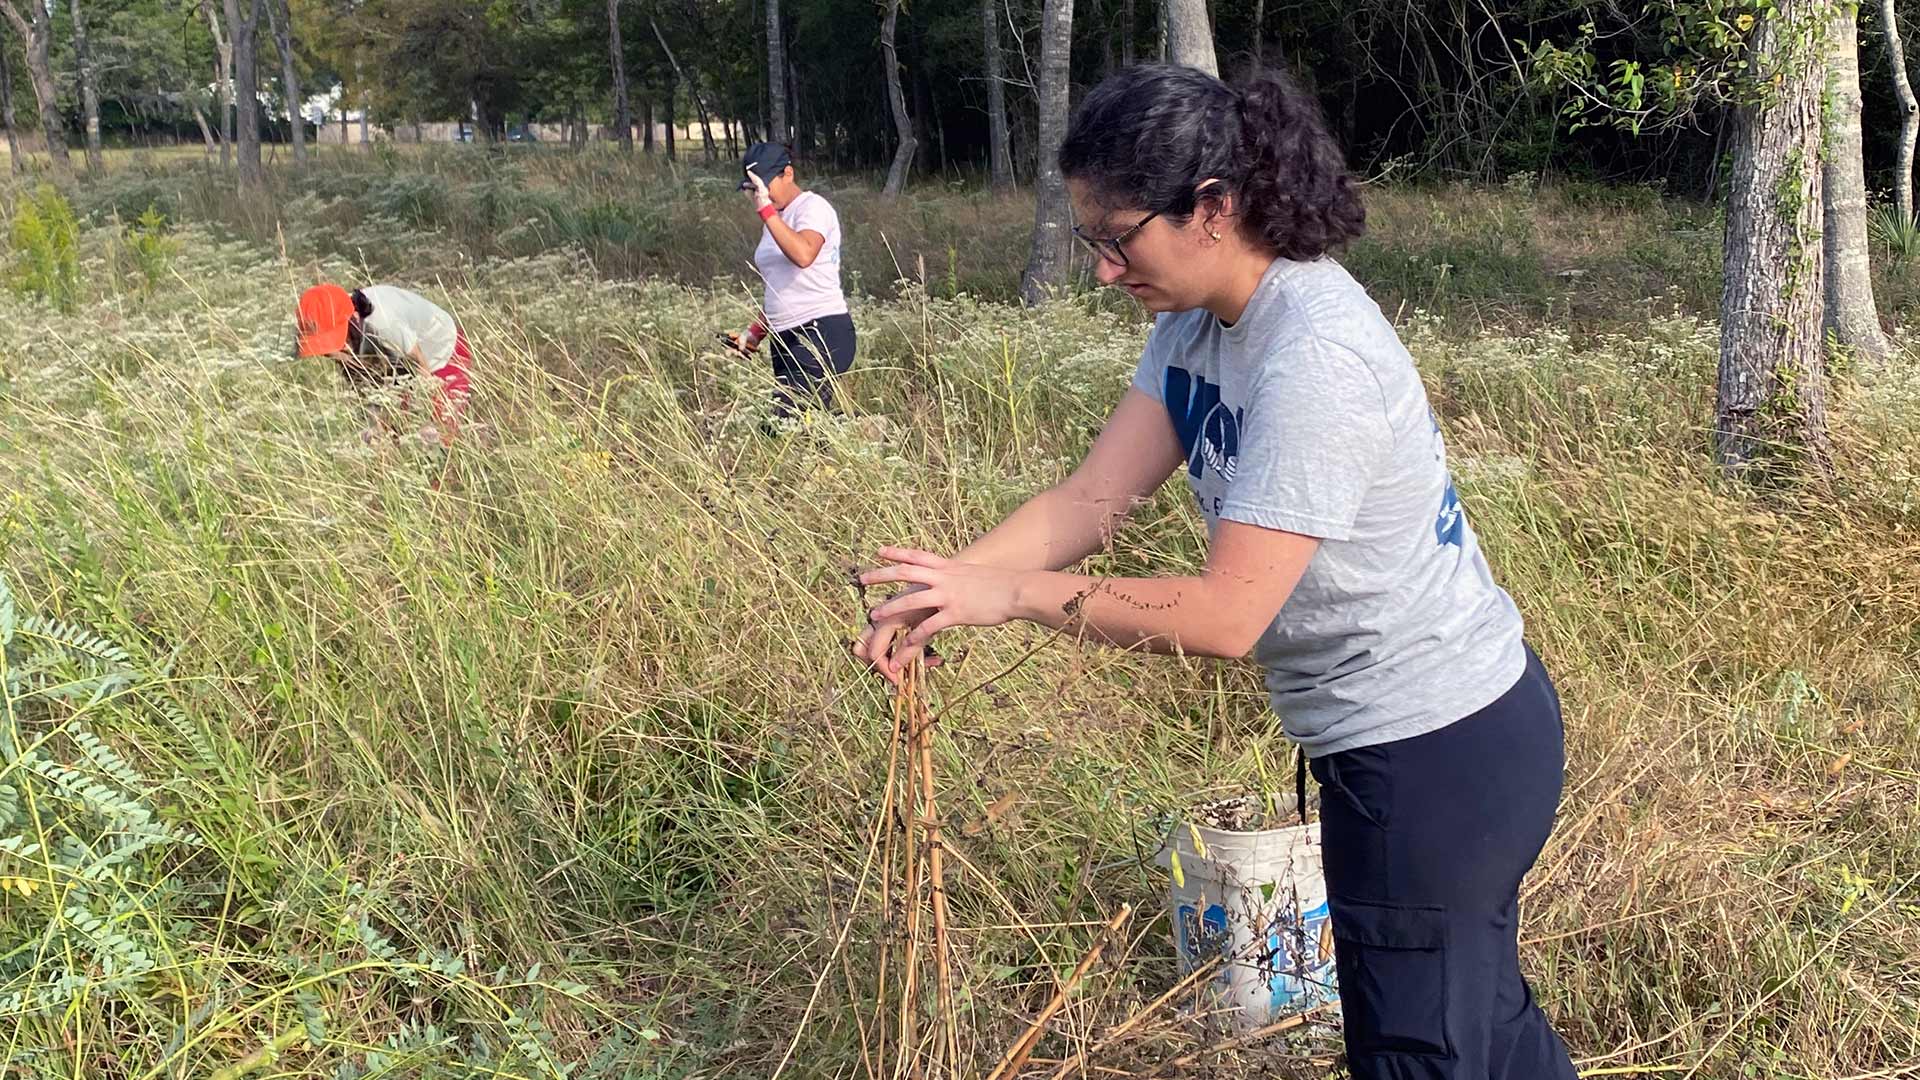 Planting event to help UHCL restore native plants to campus, support environmental sustainability